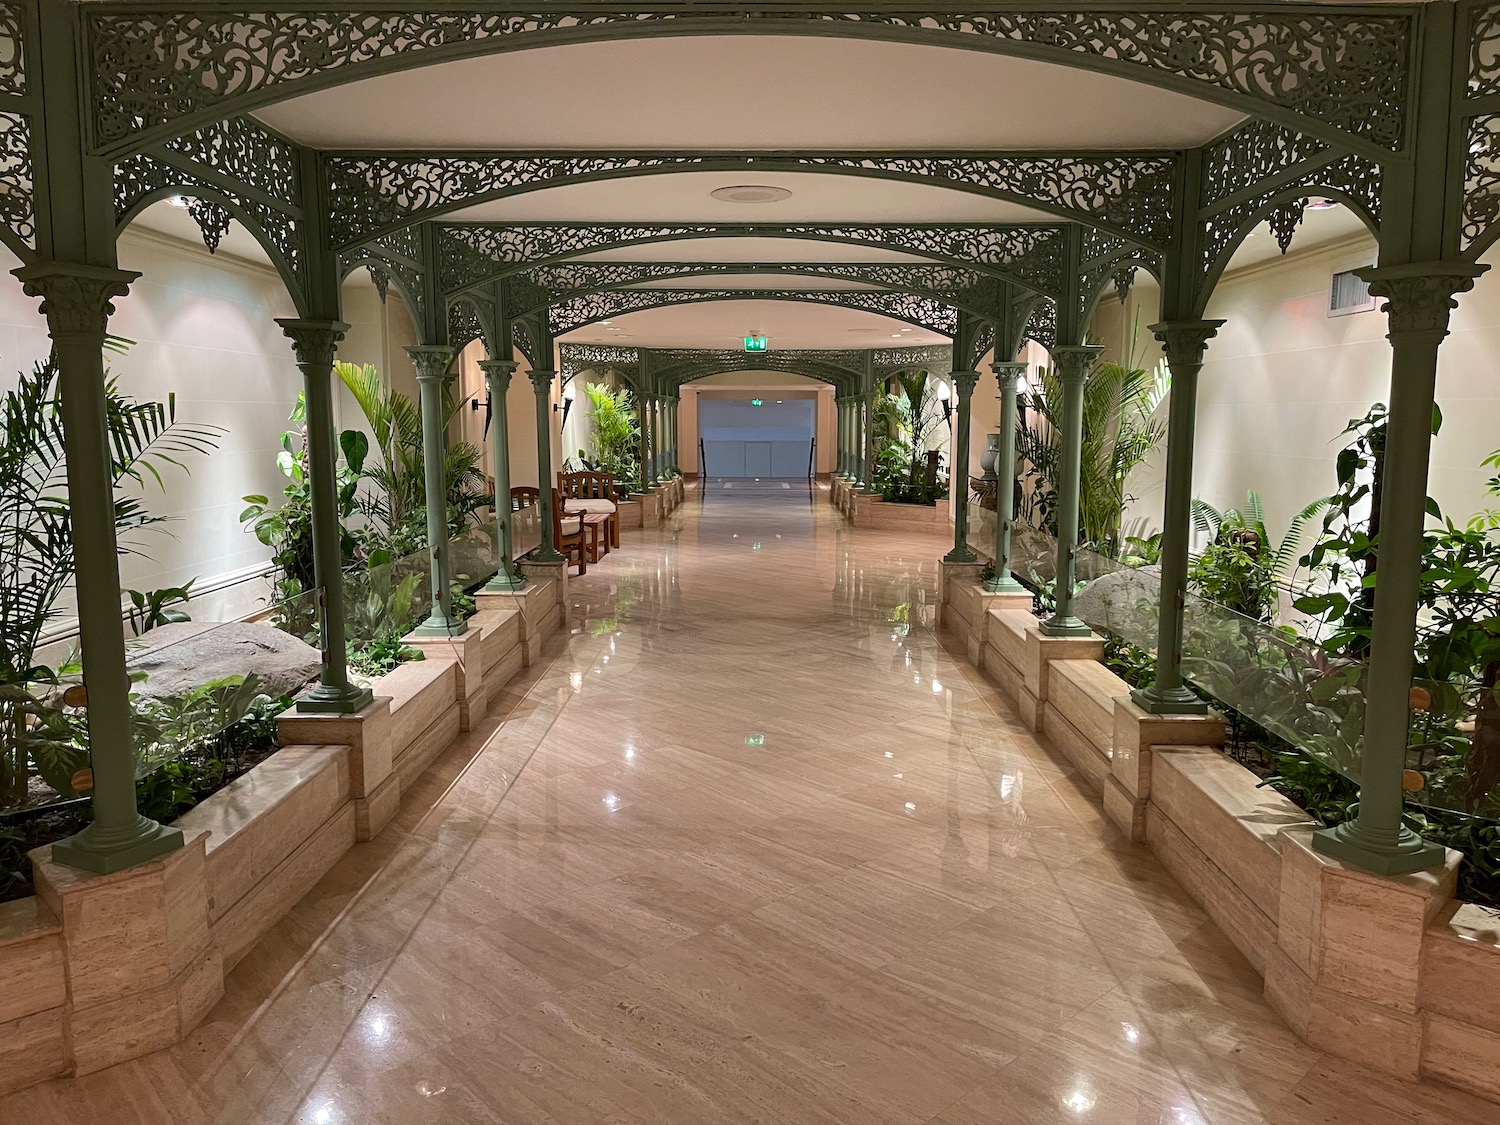 a long hallway with green pillars and plants